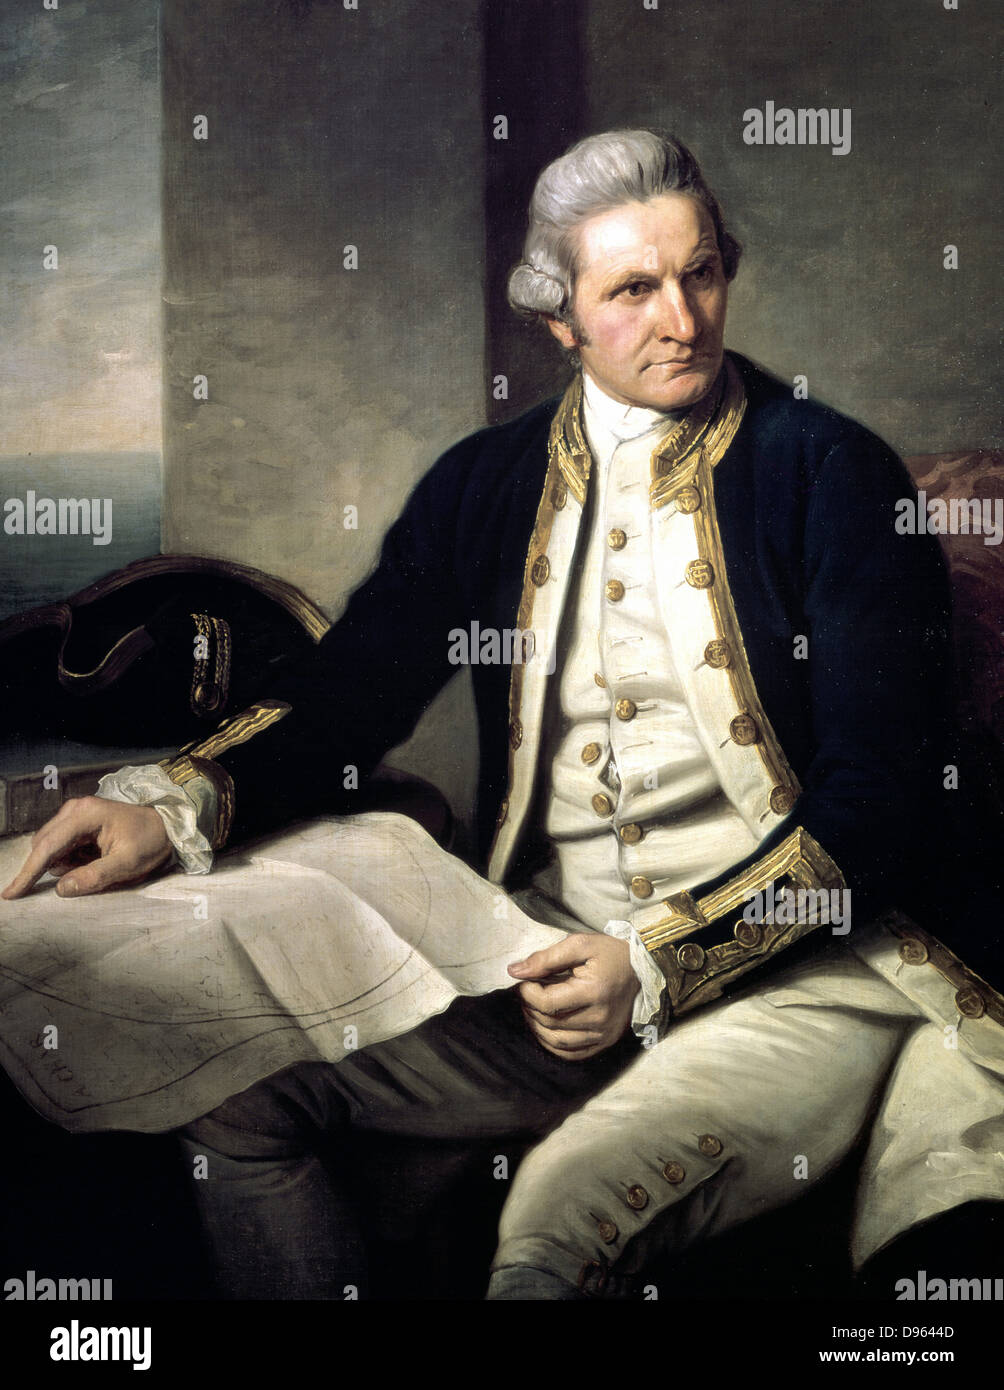 James Cook (1728-79) English explorer and navigator and hydrographer in naval uniform, seated, with hand on map of the world. Portrait by Nathaniel Dance (1735-1811) English painter. Stock Photo